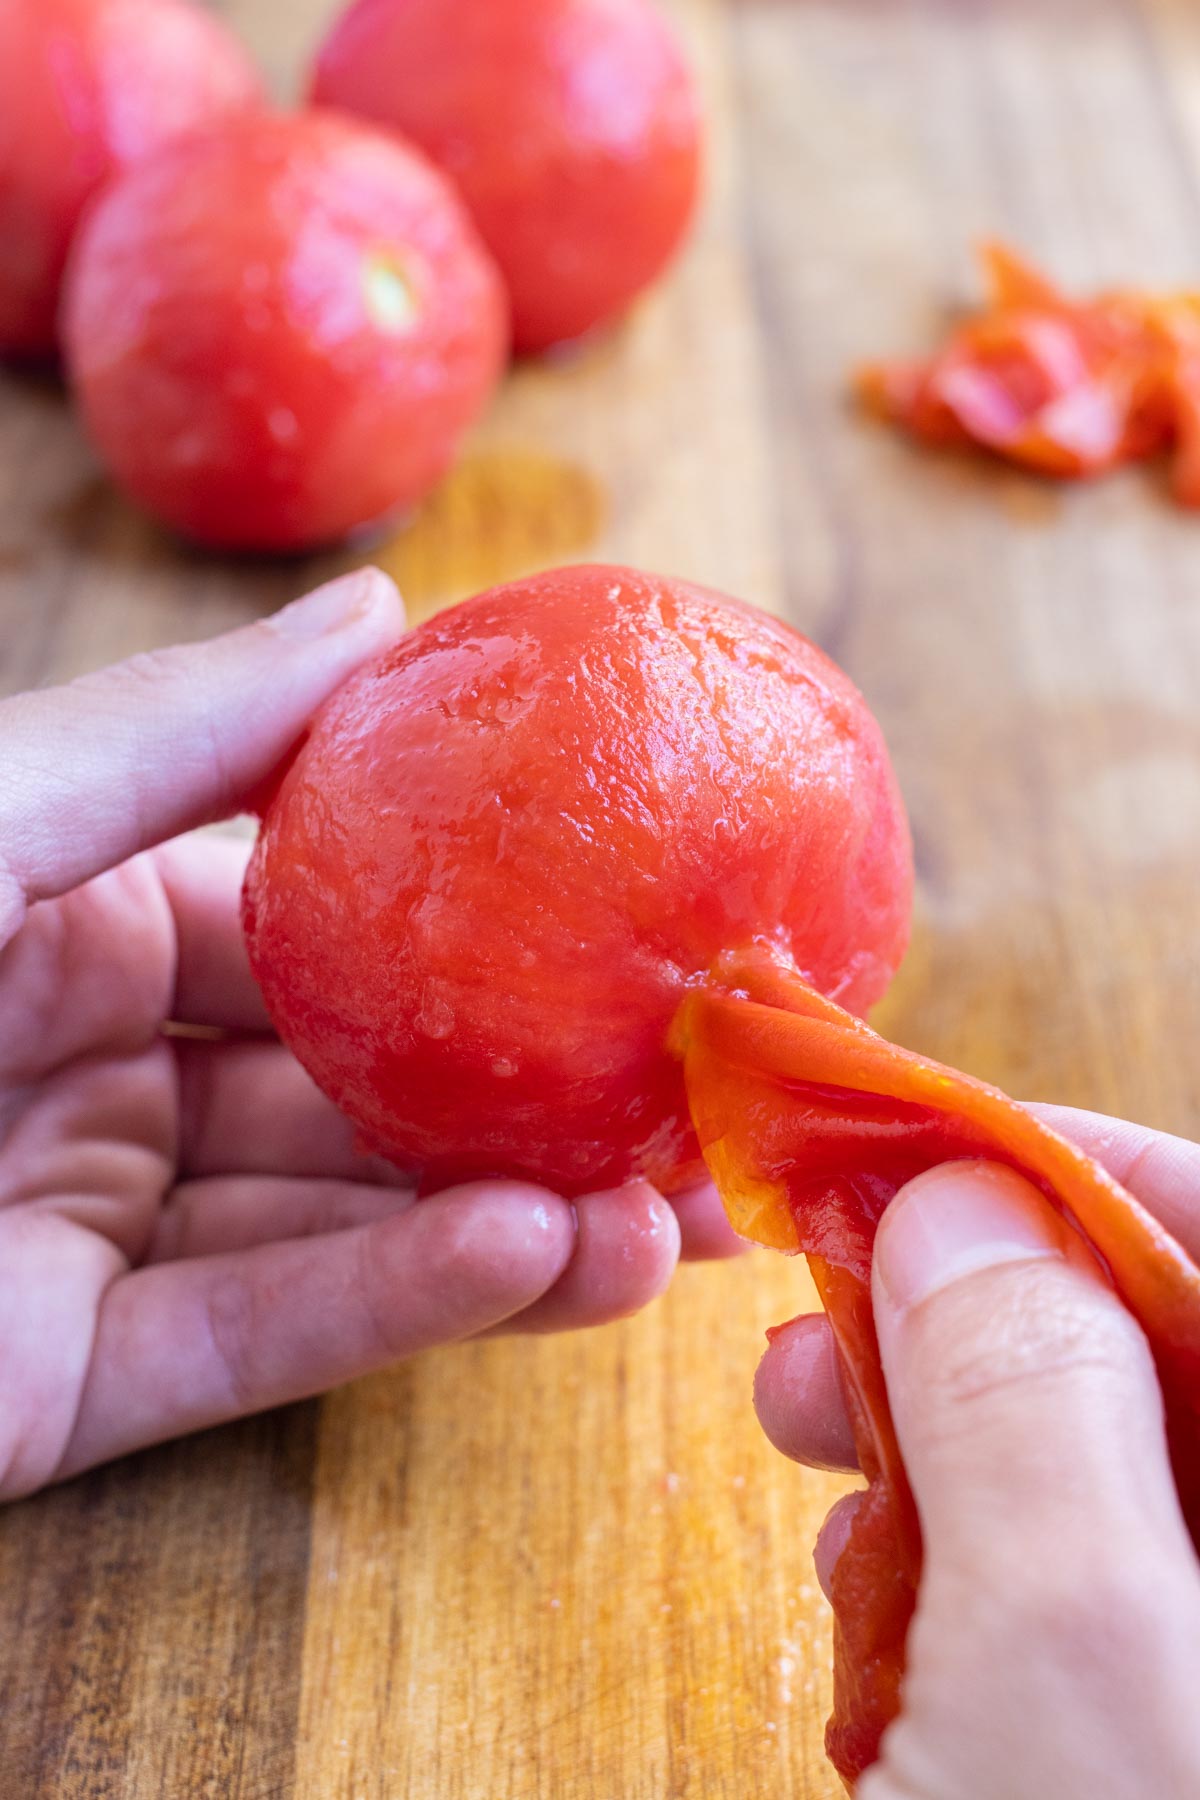 The skin should come off a tomato easily after bar-boiling it.